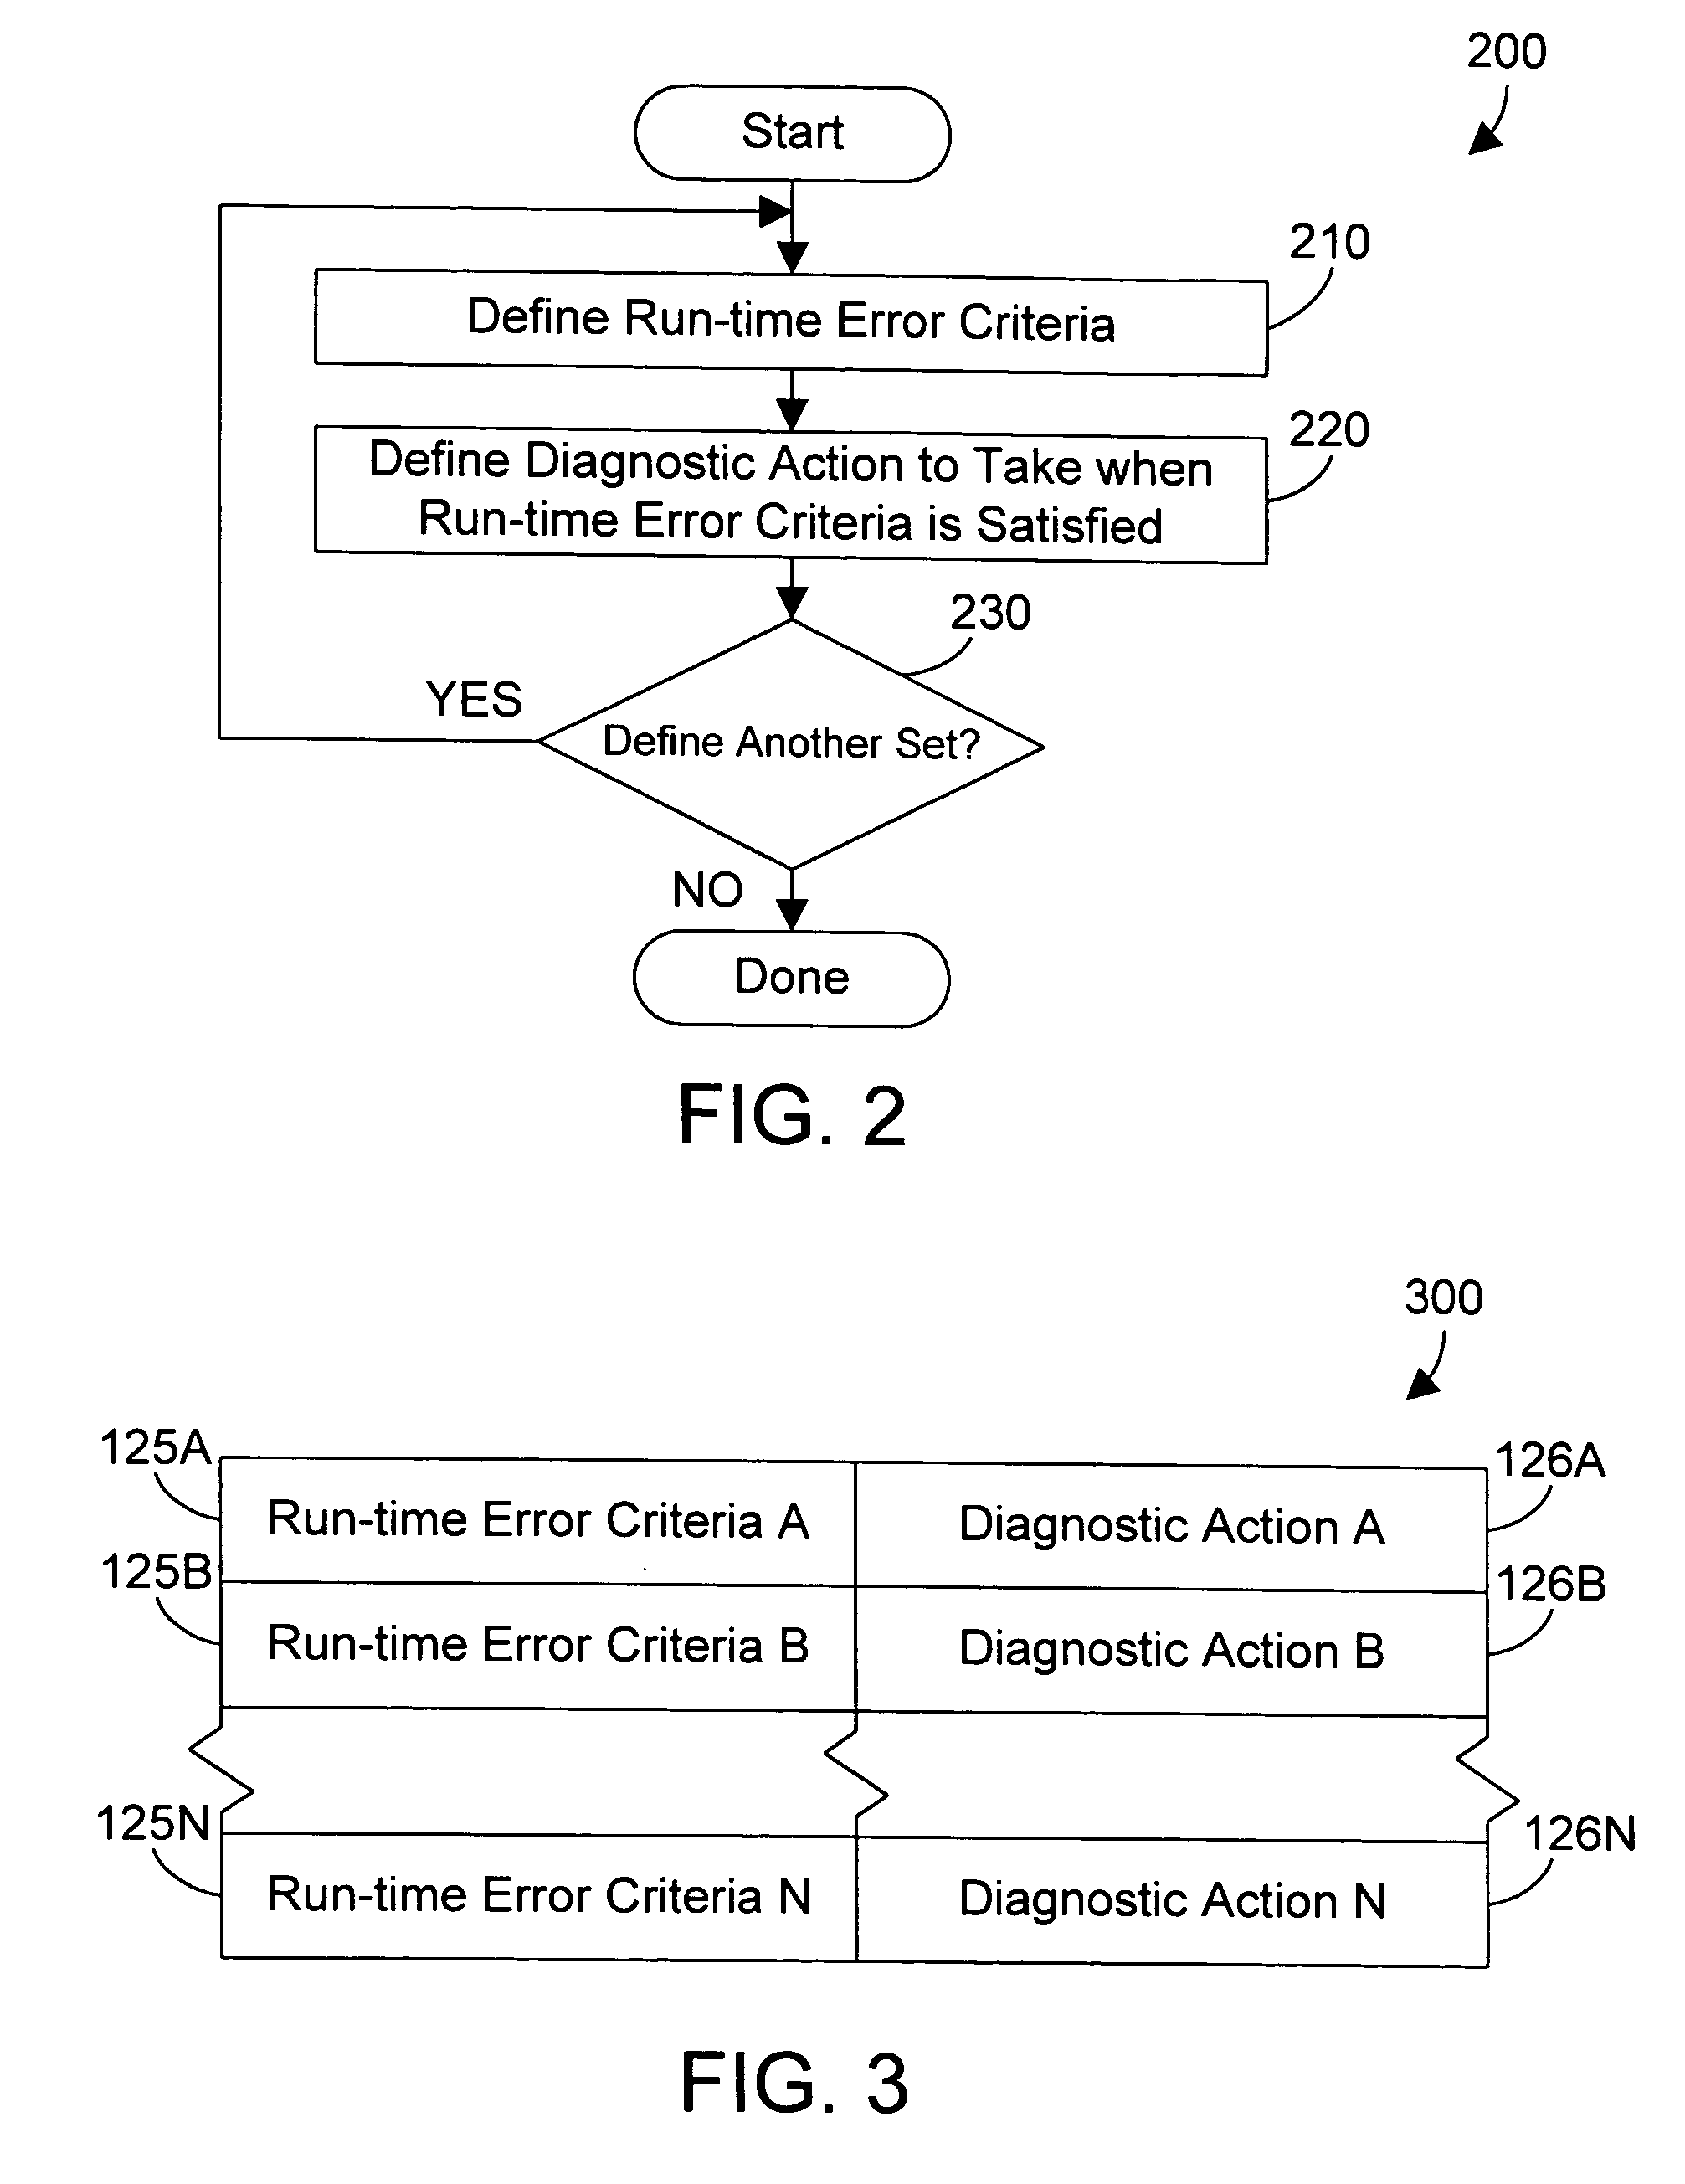 Apparatus and method for initializing diagnostic functions when specified run-time error criteria are satisfied